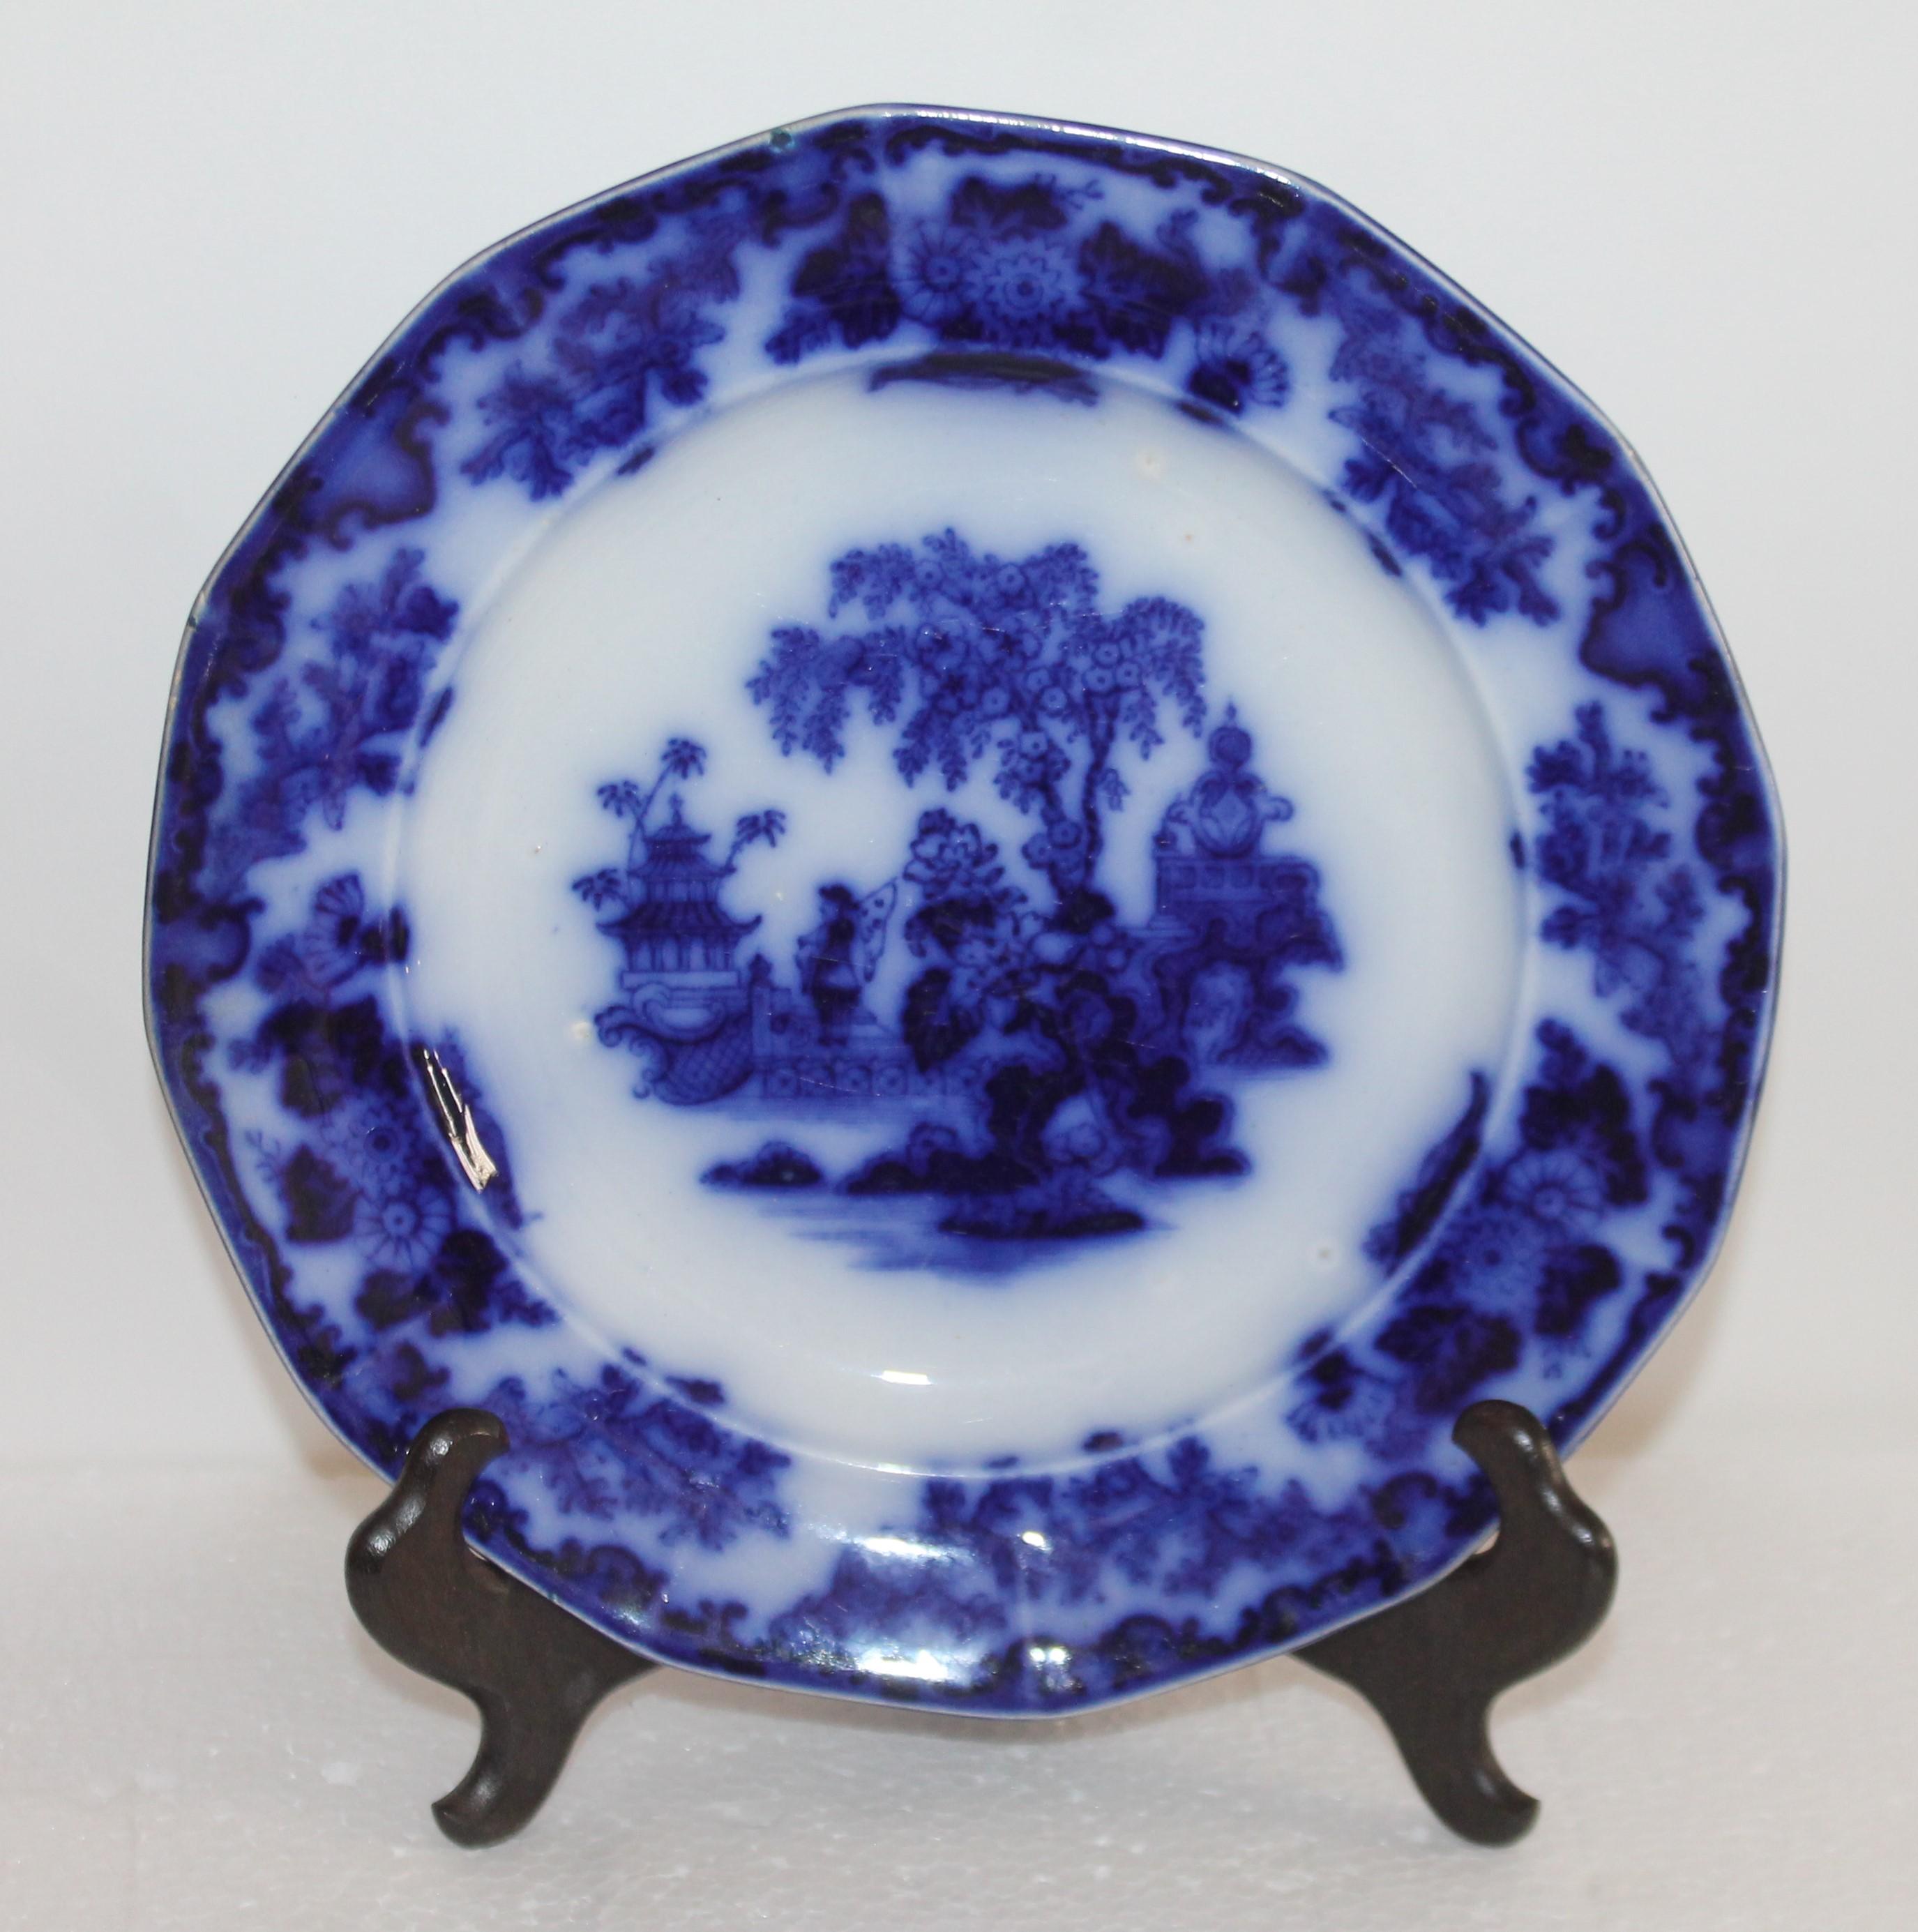 These flo blue plates are in such nice condition. One small plate has minor edge chip. Selling the collection of four plates.
Large plate measures 9.5 x 1.5 / Small plate measures 8.5 -3 plates.